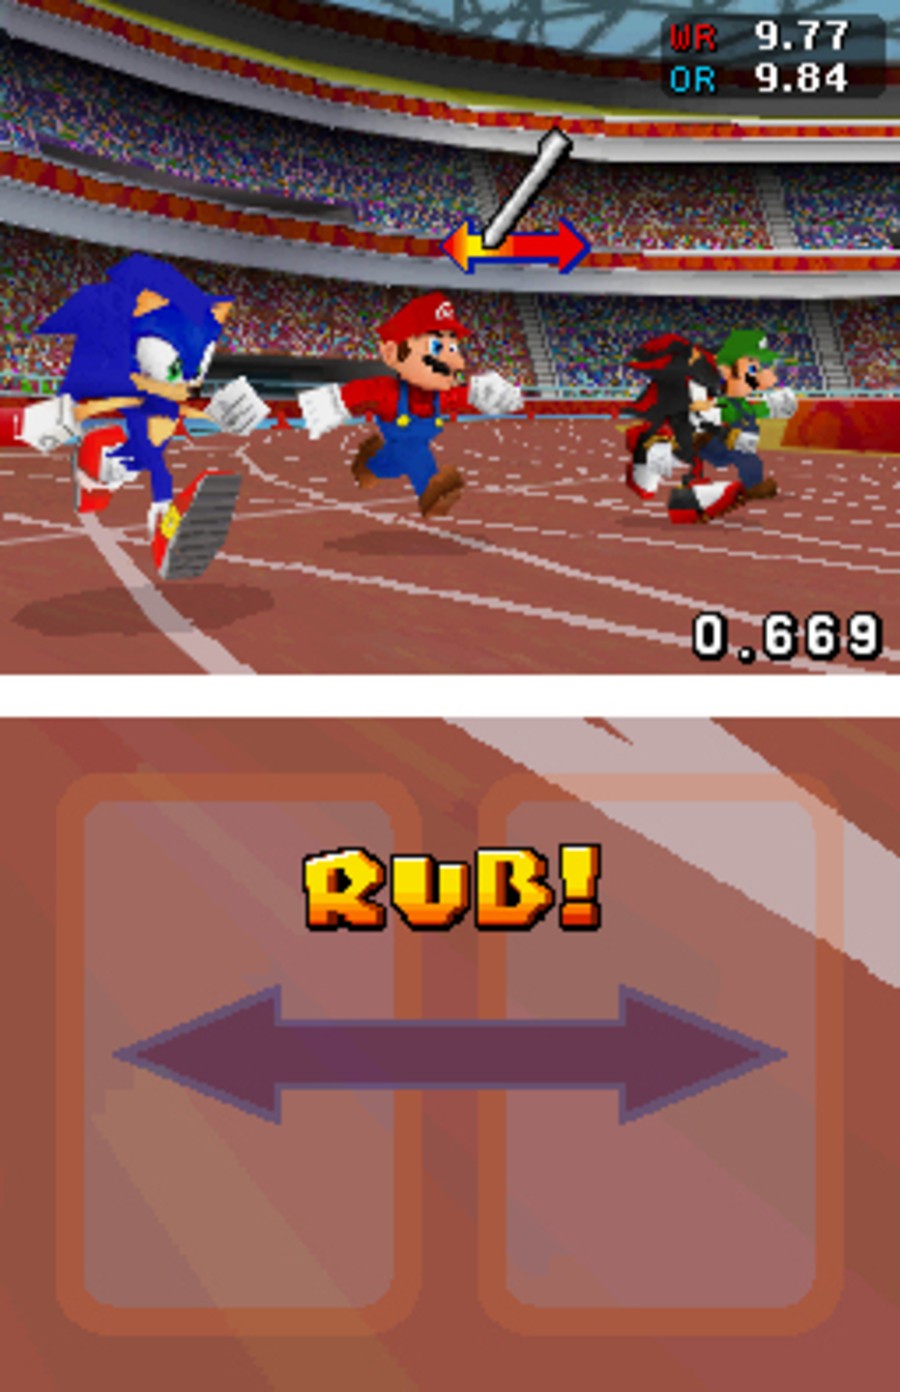 Mario & Sonic at the Olympic Games (DS) Screenshots